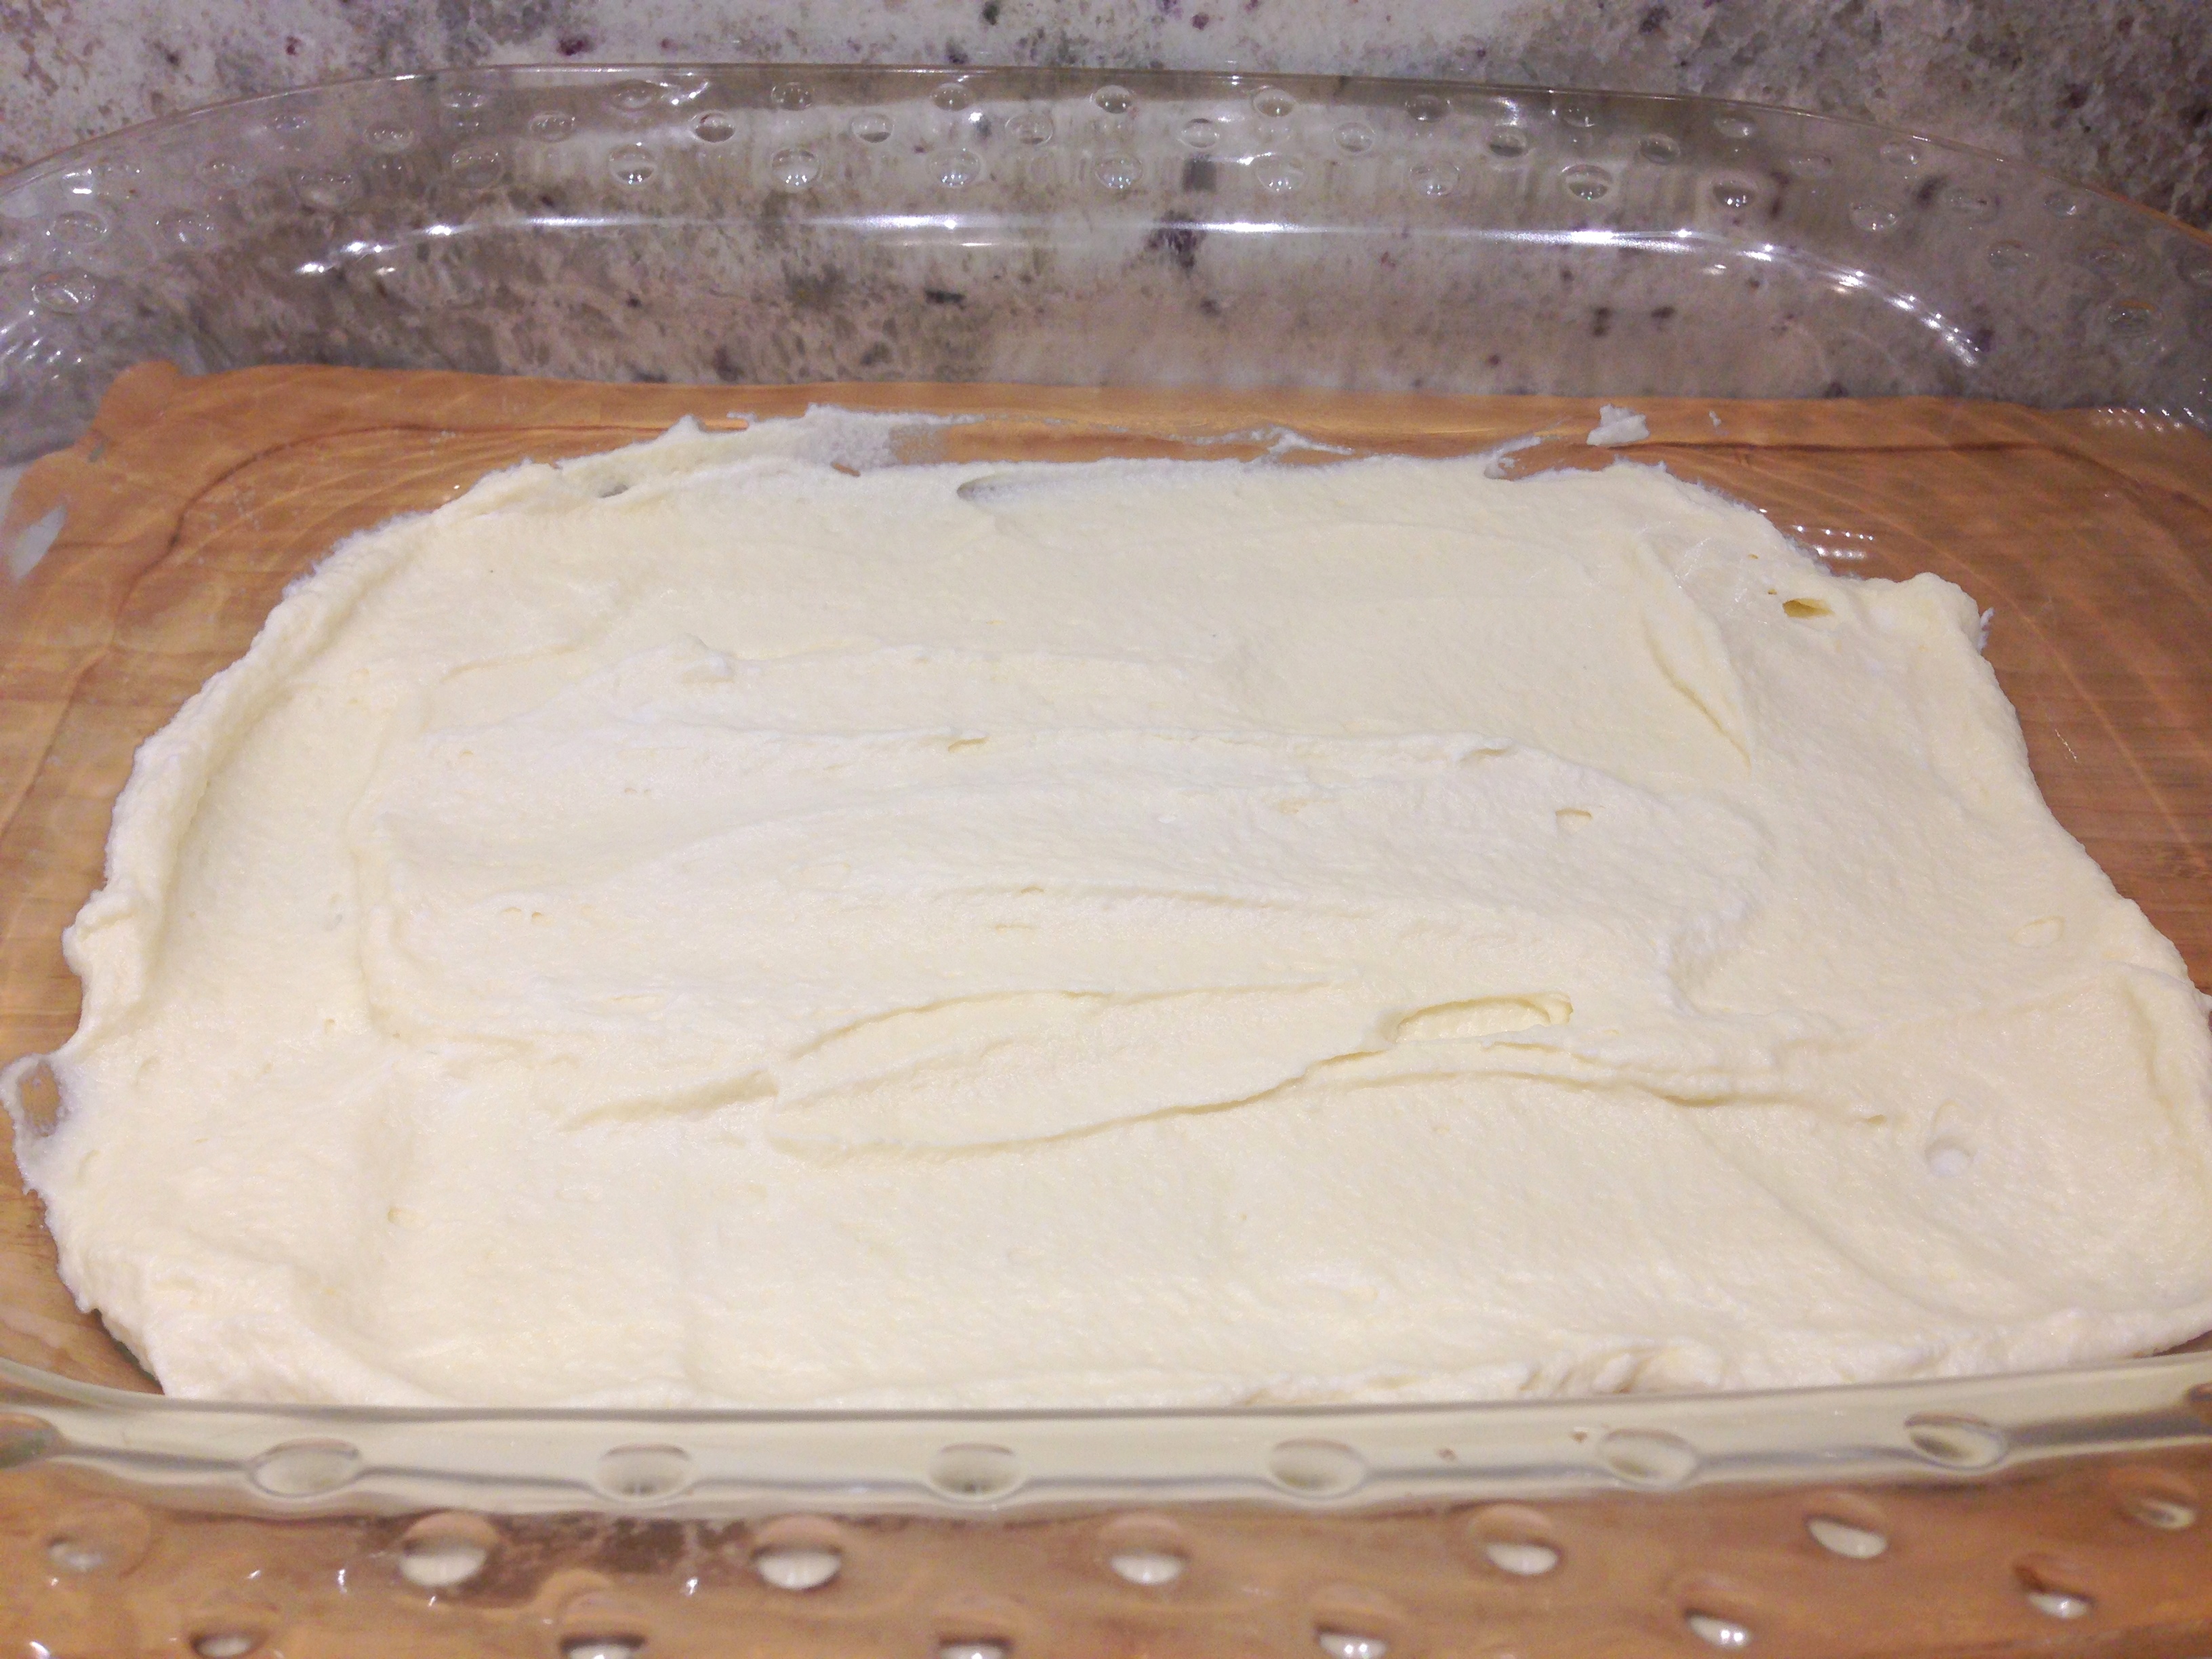 1st layer of cream filling